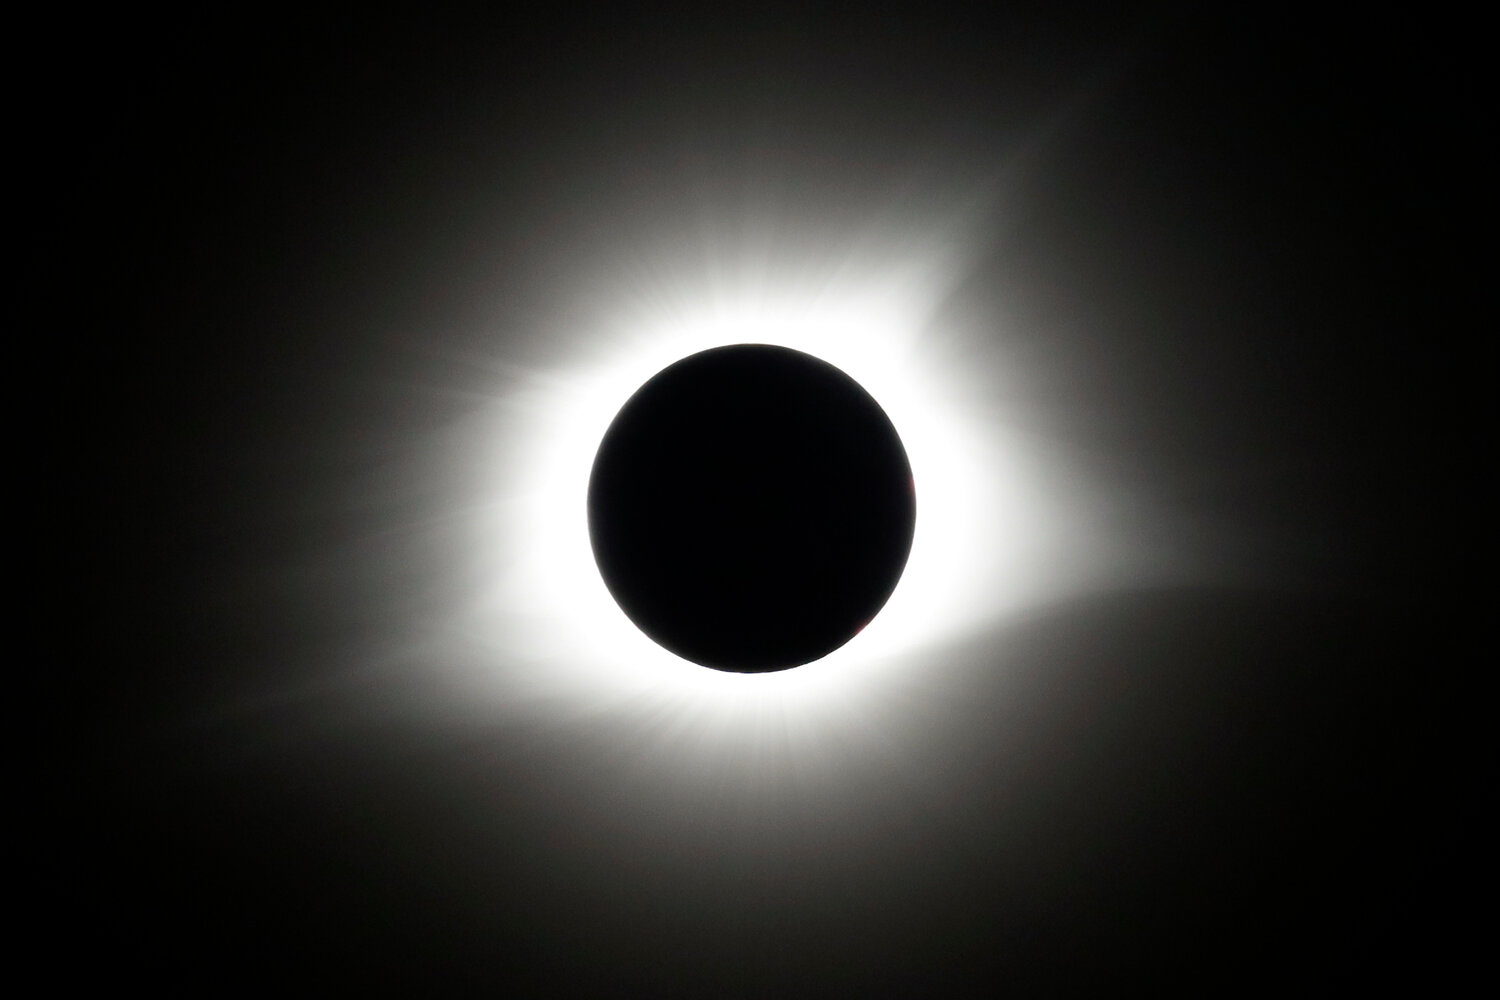 FILE - The period of total coverage during the solar eclipse is seen near Hopkinsville, Ky. Monday, Aug. 21, 2017. The location, which is in the path of totality, is also at the point of greatest intensity. Itâs only a year until a total solar eclipse sweeps across North America. On April 8, 2024, the moon will cast its shadow across a stretch of the U.S., Mexico and Canada, plunging millions of people into midday darkness. (AP Photo/Mark Humphrey, File)